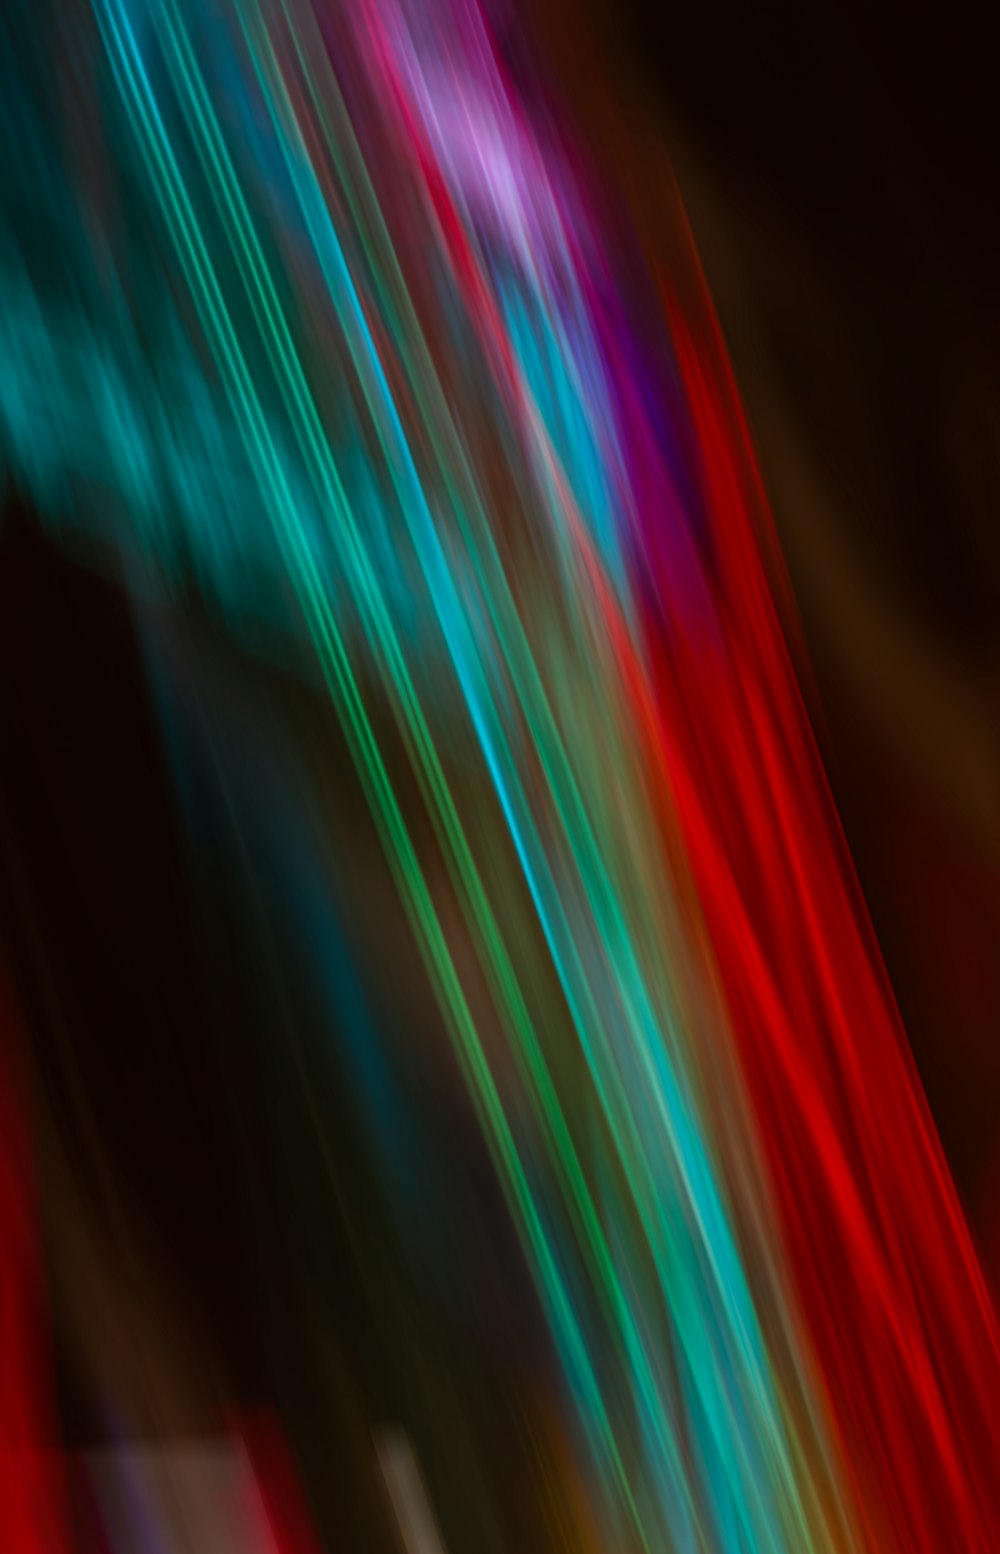 a blurry photo of a red, green, and blue object